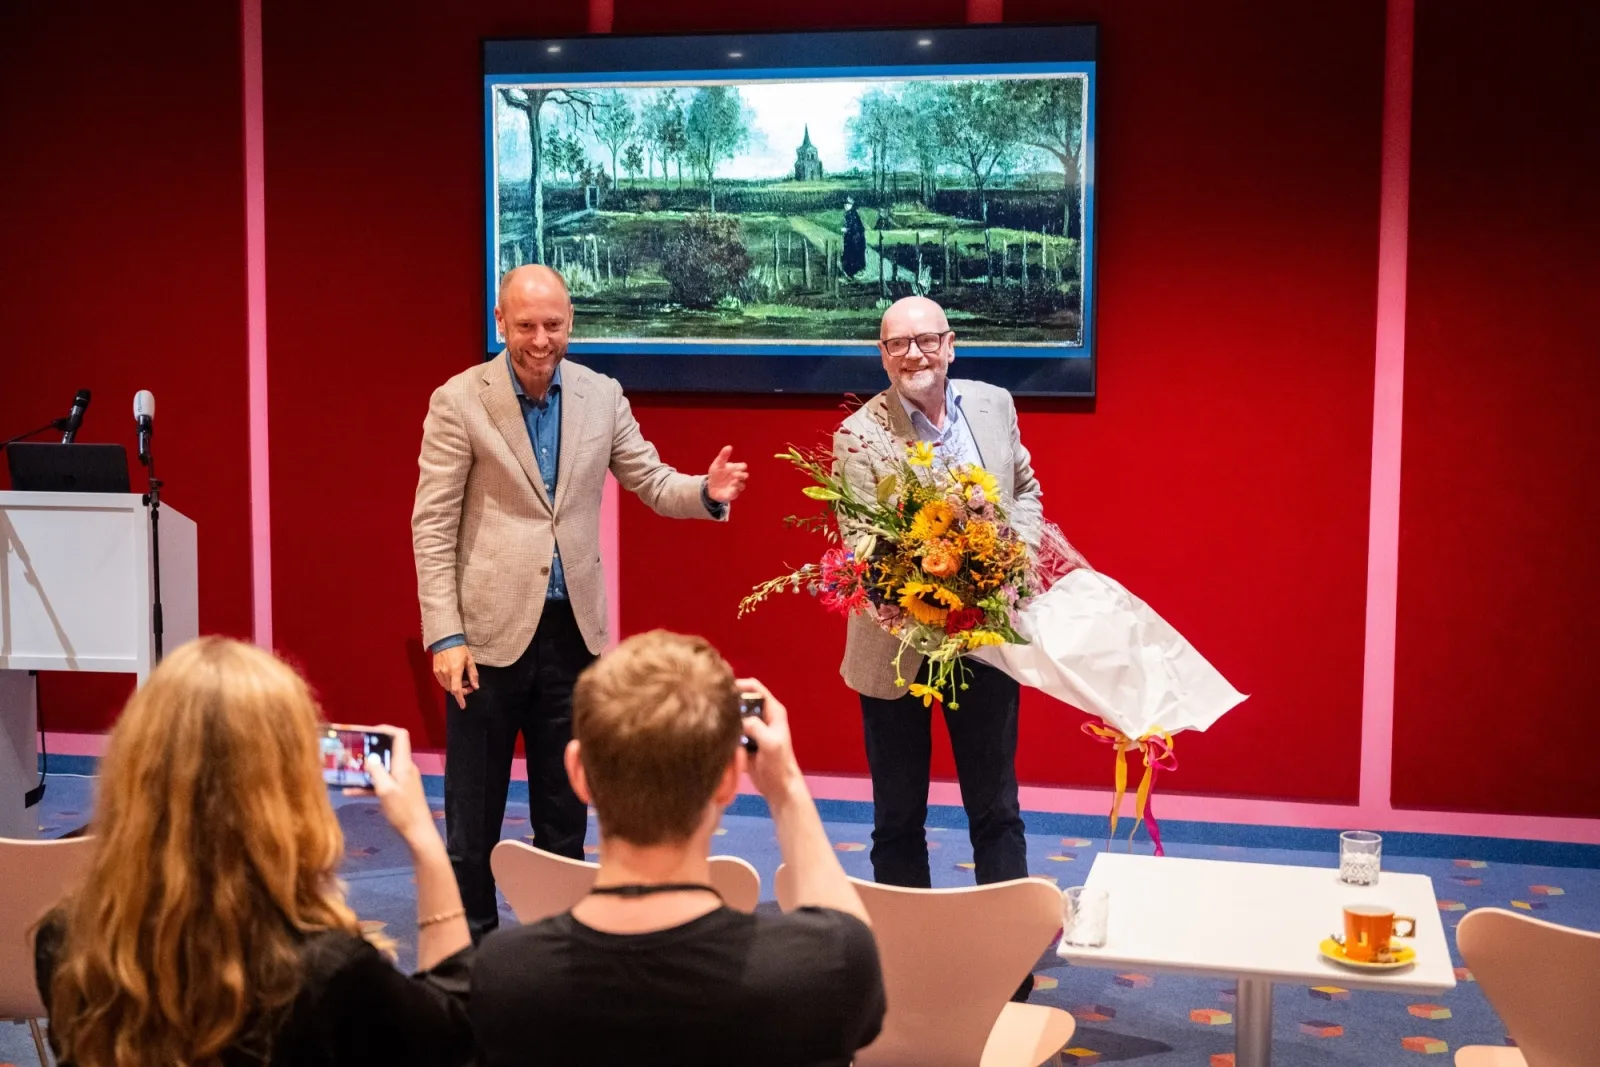 A man receives flowers in front of a recovered Van Gogh painting.